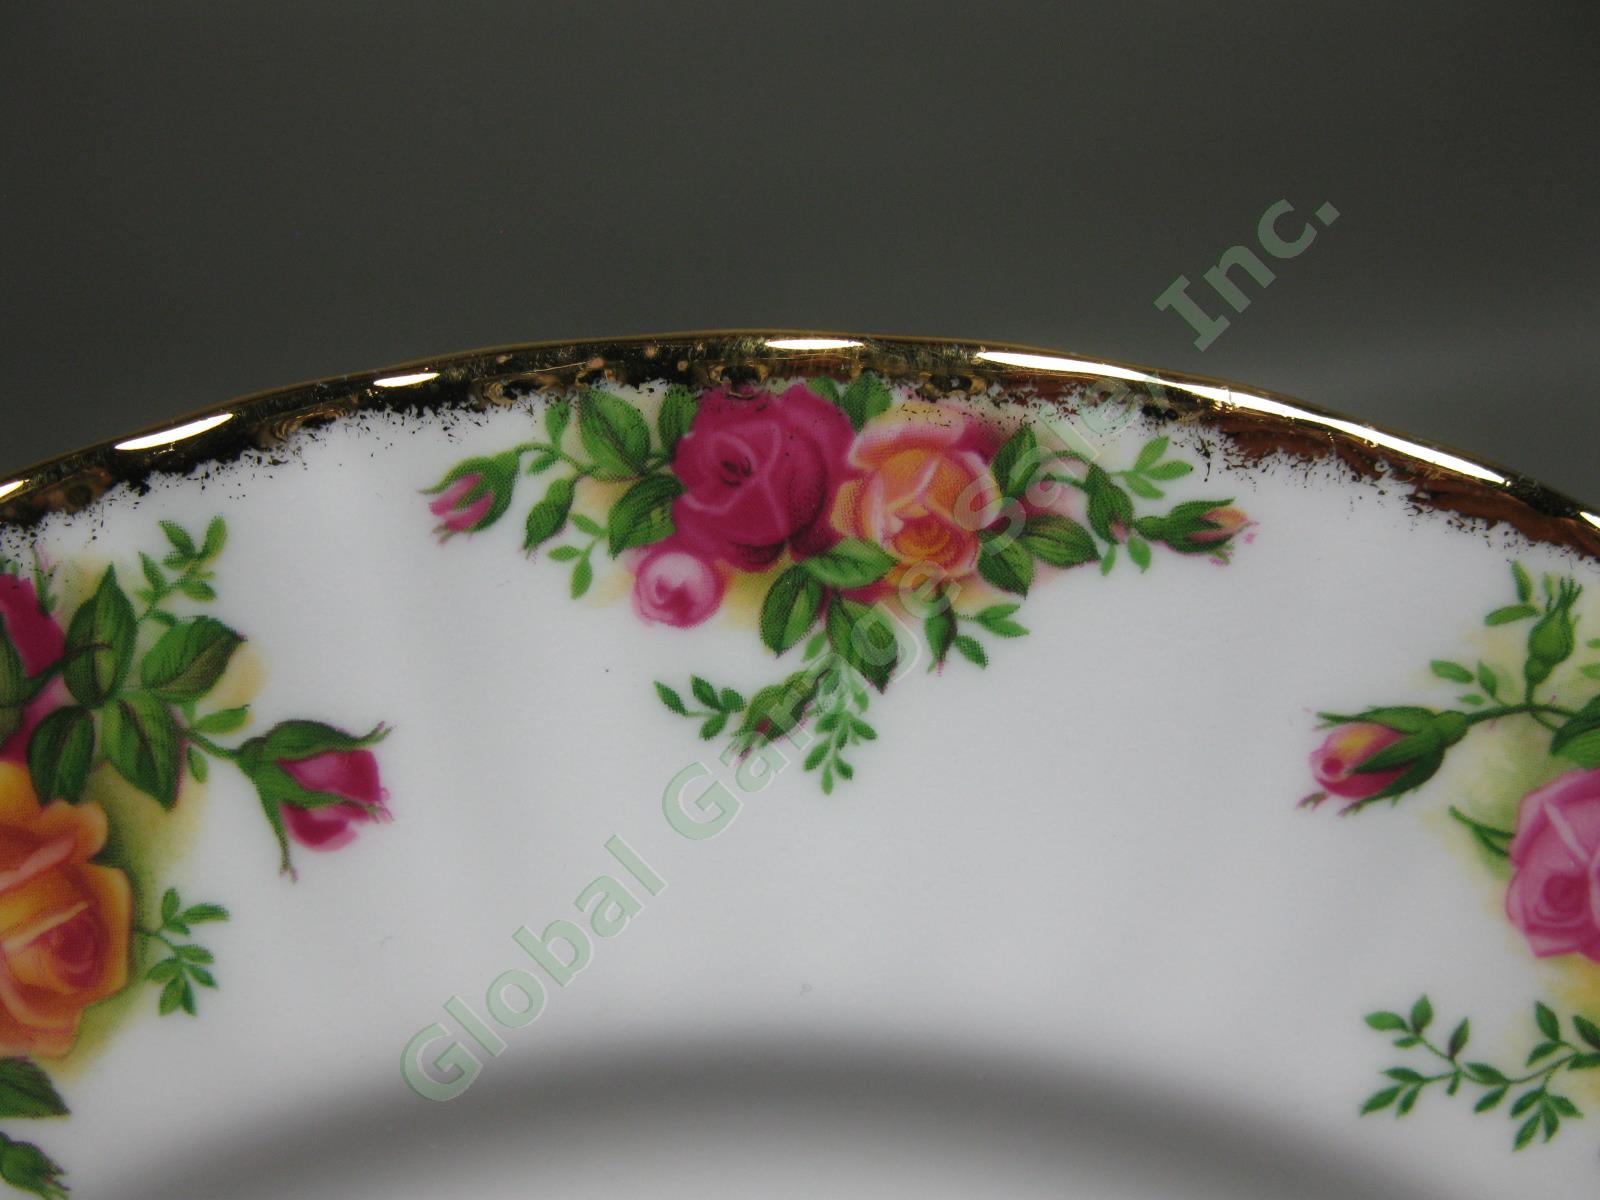 4 Royal Albert Old Country Roses Place Settings Serving Bowl Platter Plate Set 2